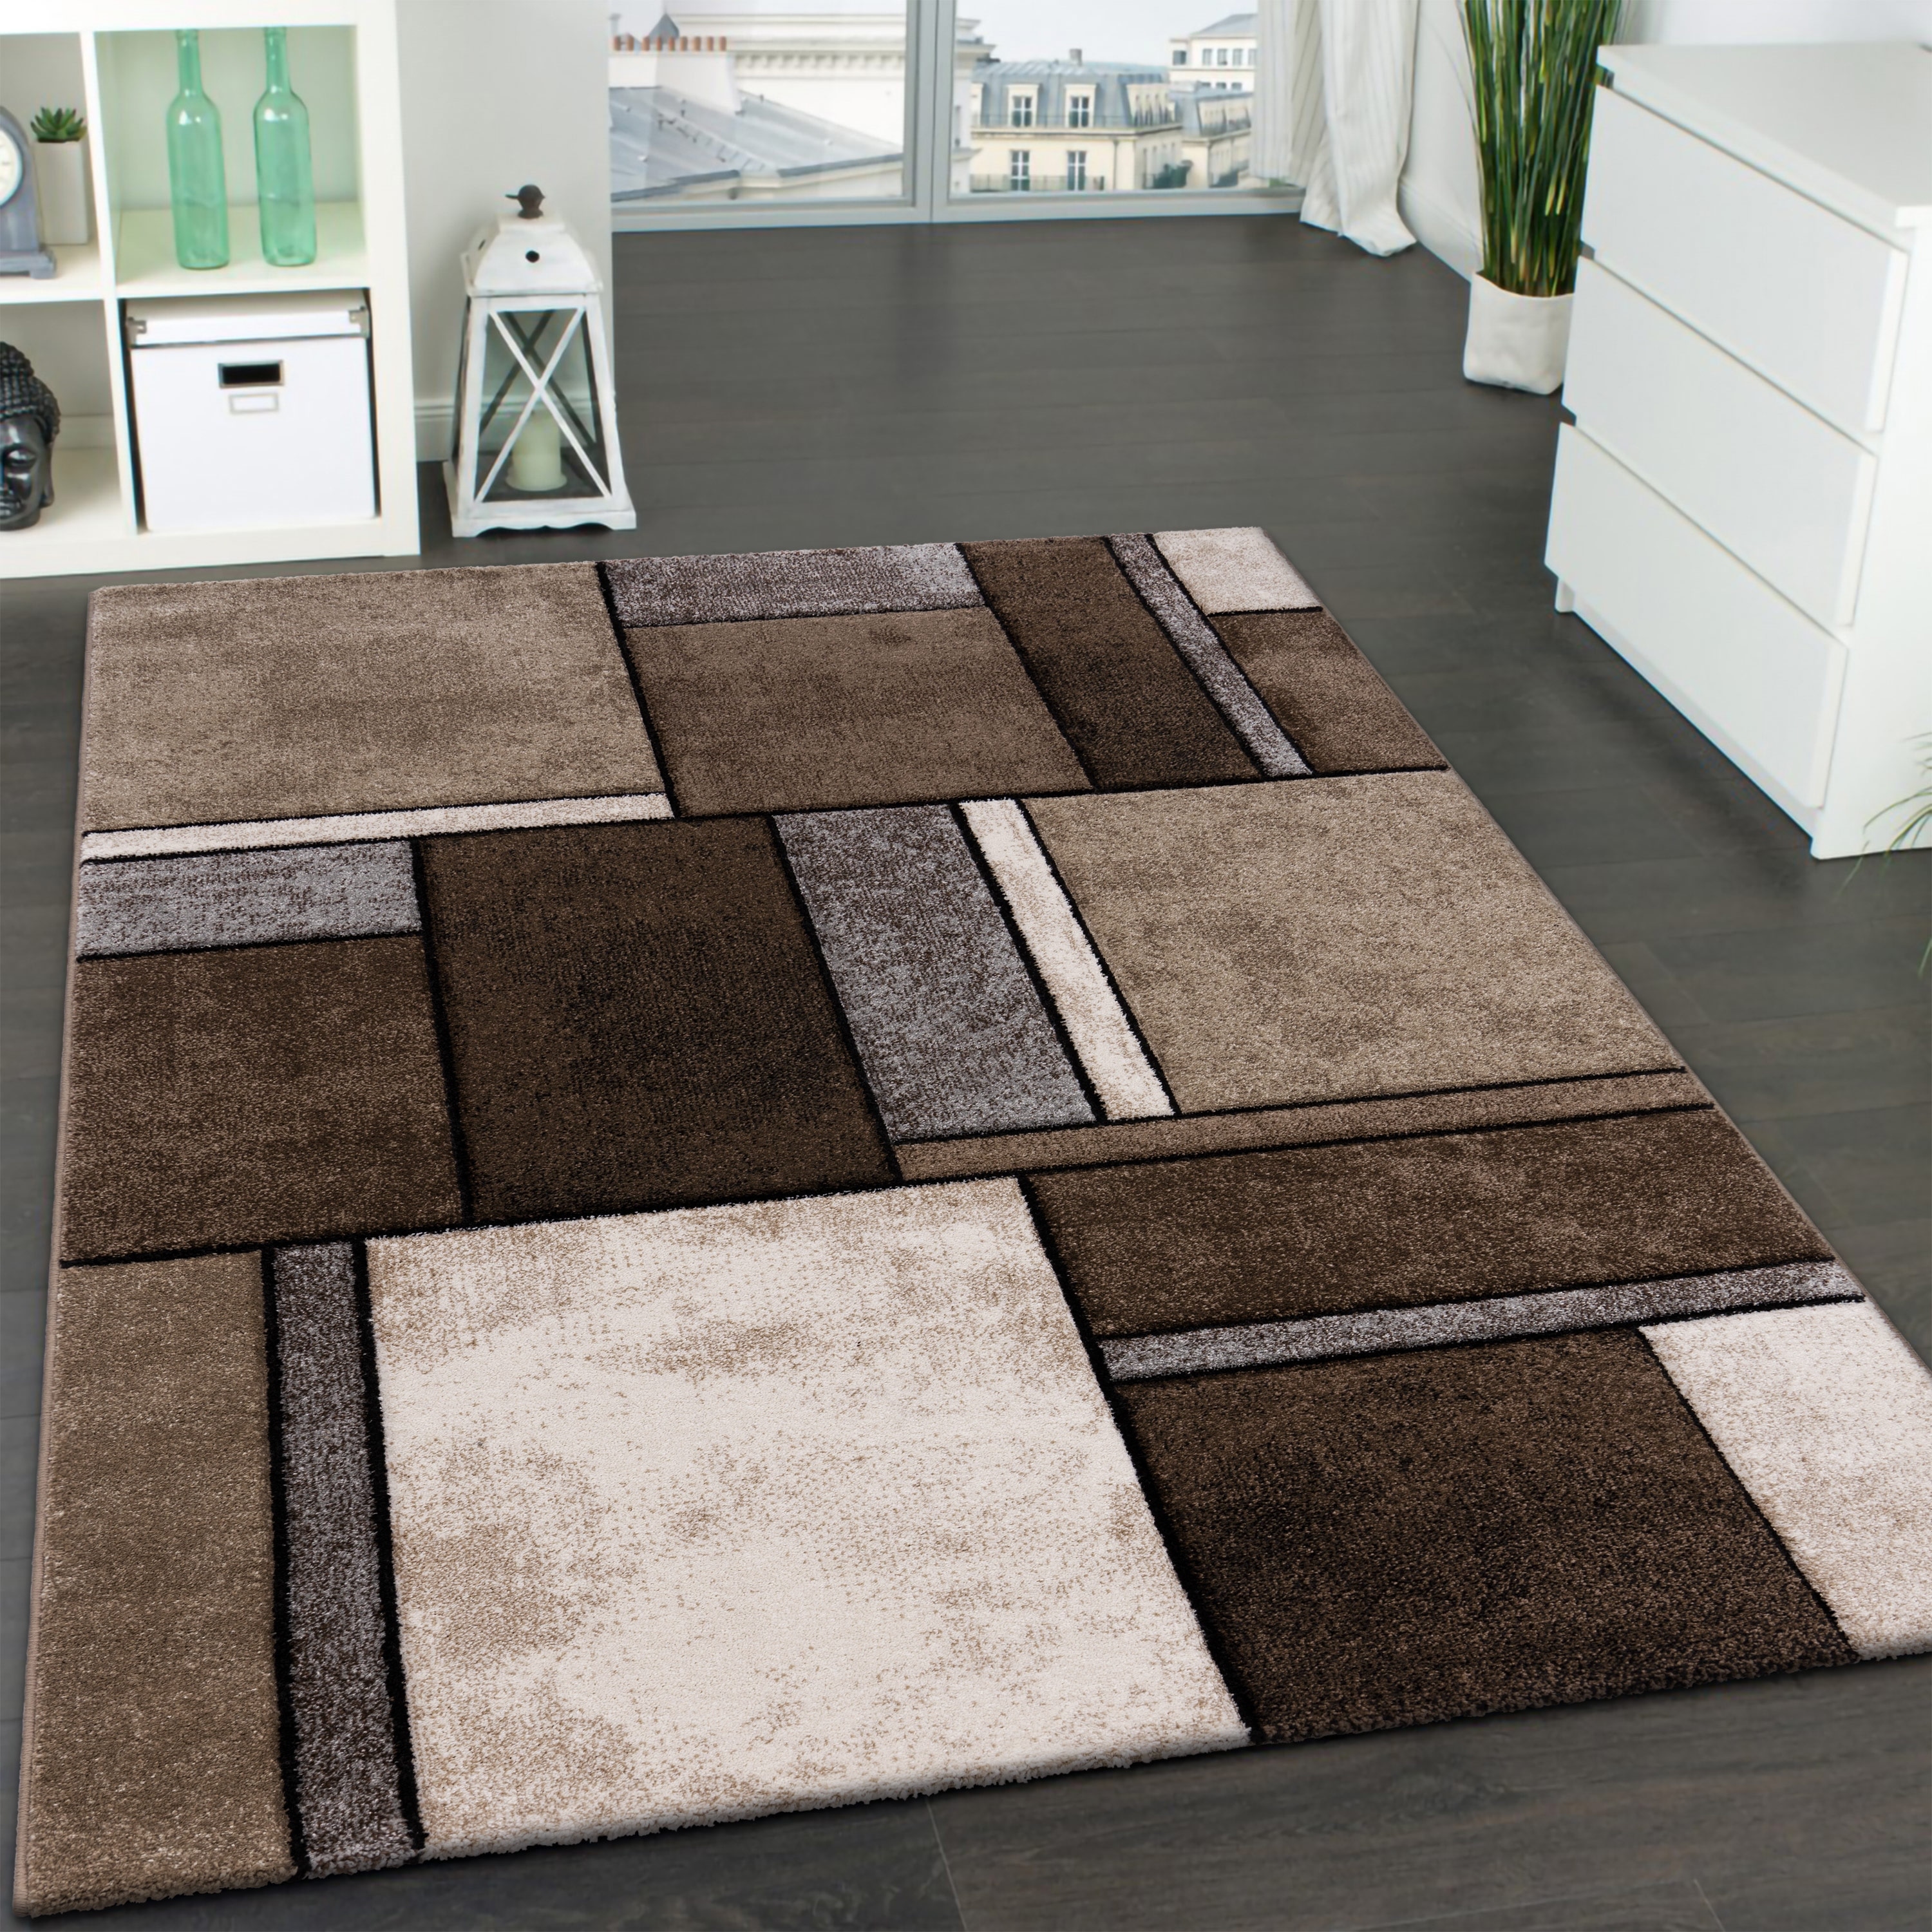  Paco Home Area Rug Modern Geometric Pattern in Brown Beige,  Size: 3'11 x 5'7 : Home & Kitchen